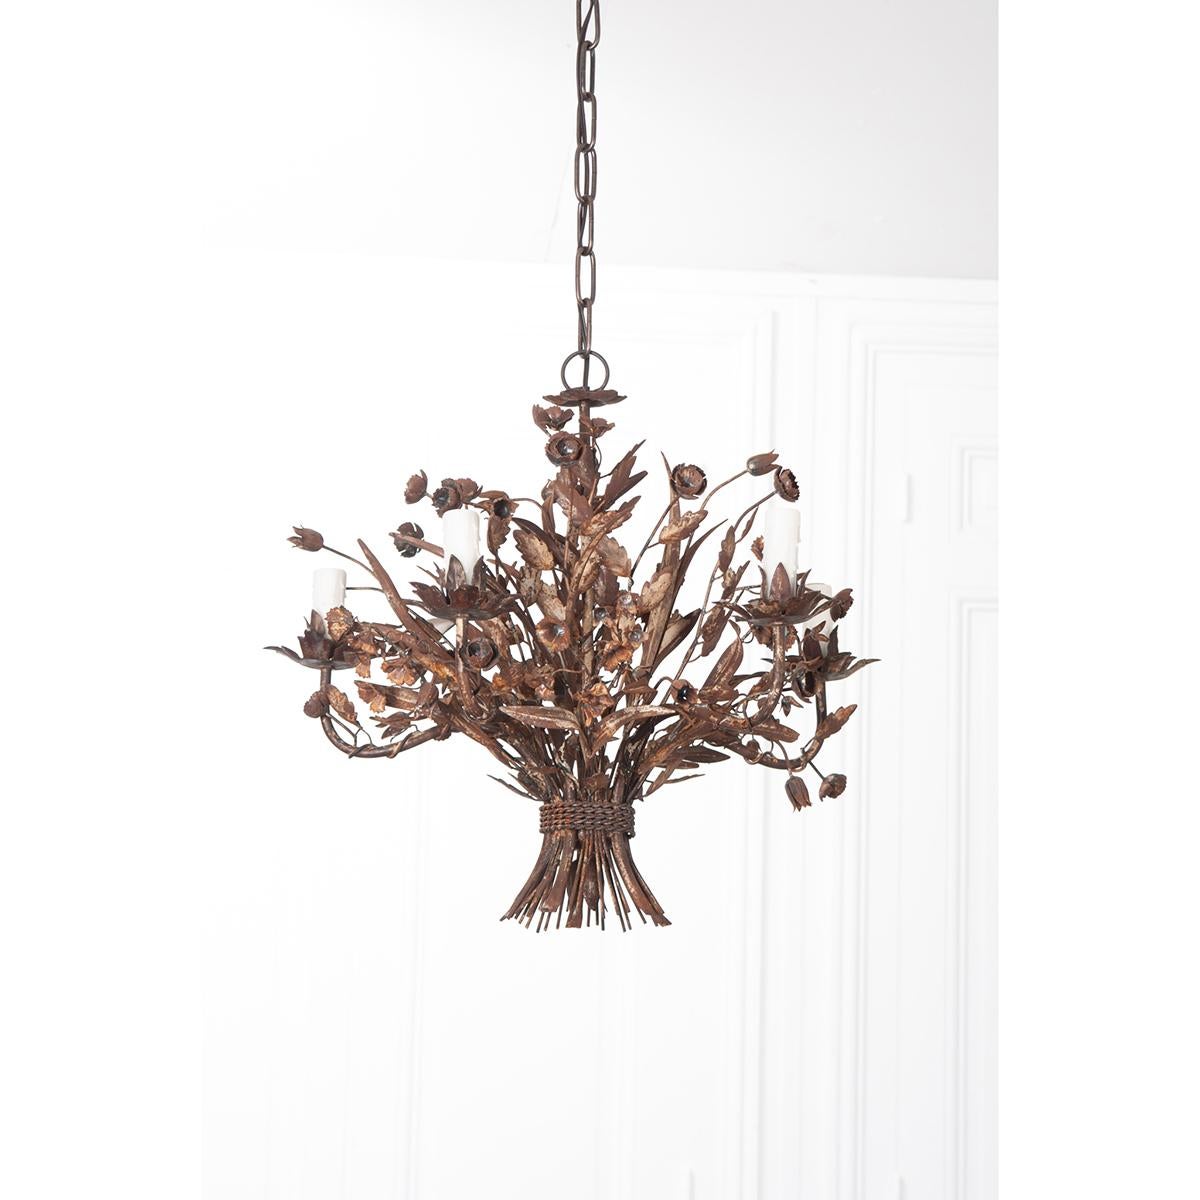 A charming vintage five light metal chandelier from early 20th century France. Beautifully made in delicate metalwork with dainty flowers, leaves and twisting vines all bound by a rope, a real artpiece adding a certain French ‘je ne sais quoi’ to